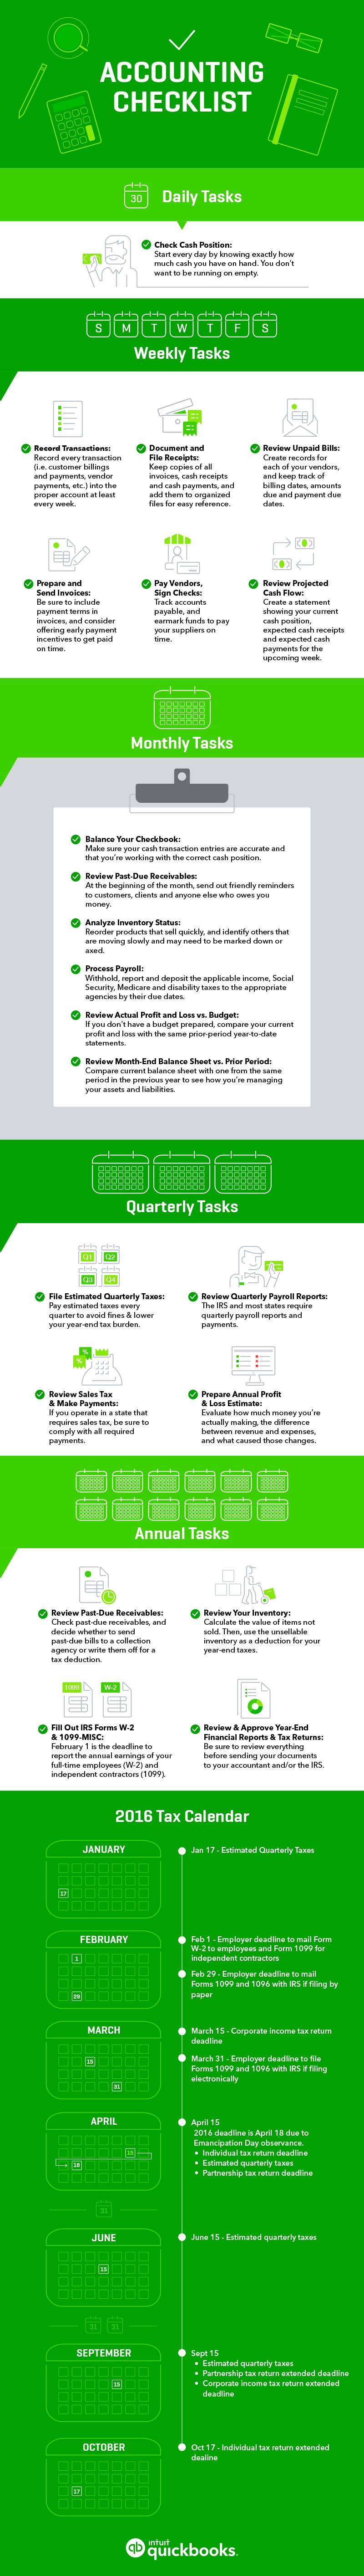 infographic-Accounting-Checklist